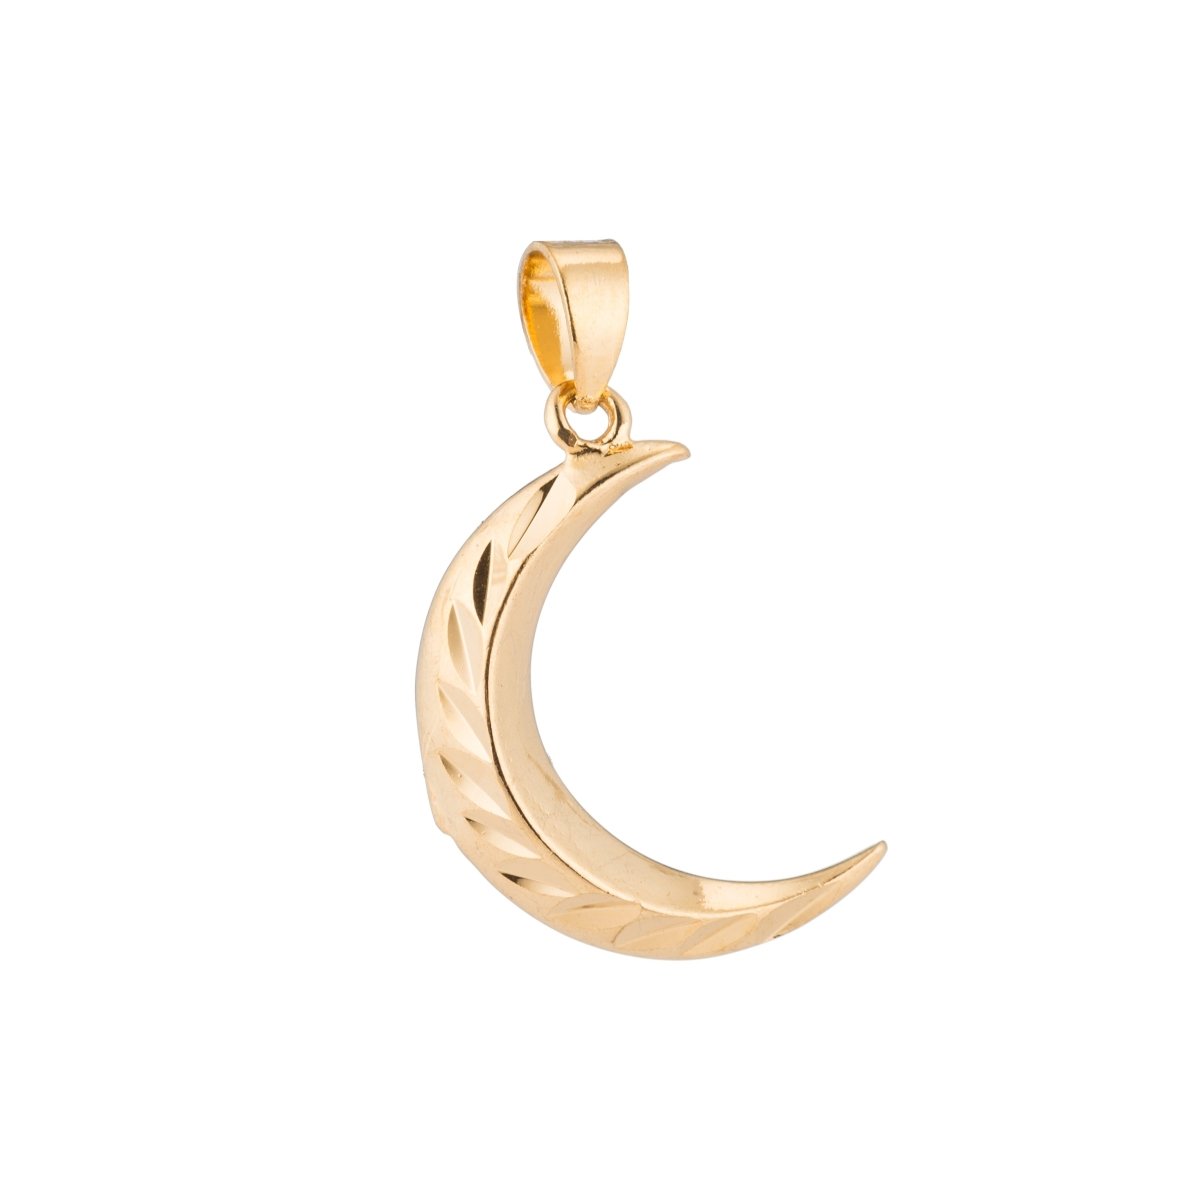 Gold Crescent Moon, Modern, Dream, Cute, Sky, Celestial, Shine, DIY Craft Necklace Pendant Charm Bead Bails Findings for Jewelry Making H-225 - DLUXCA